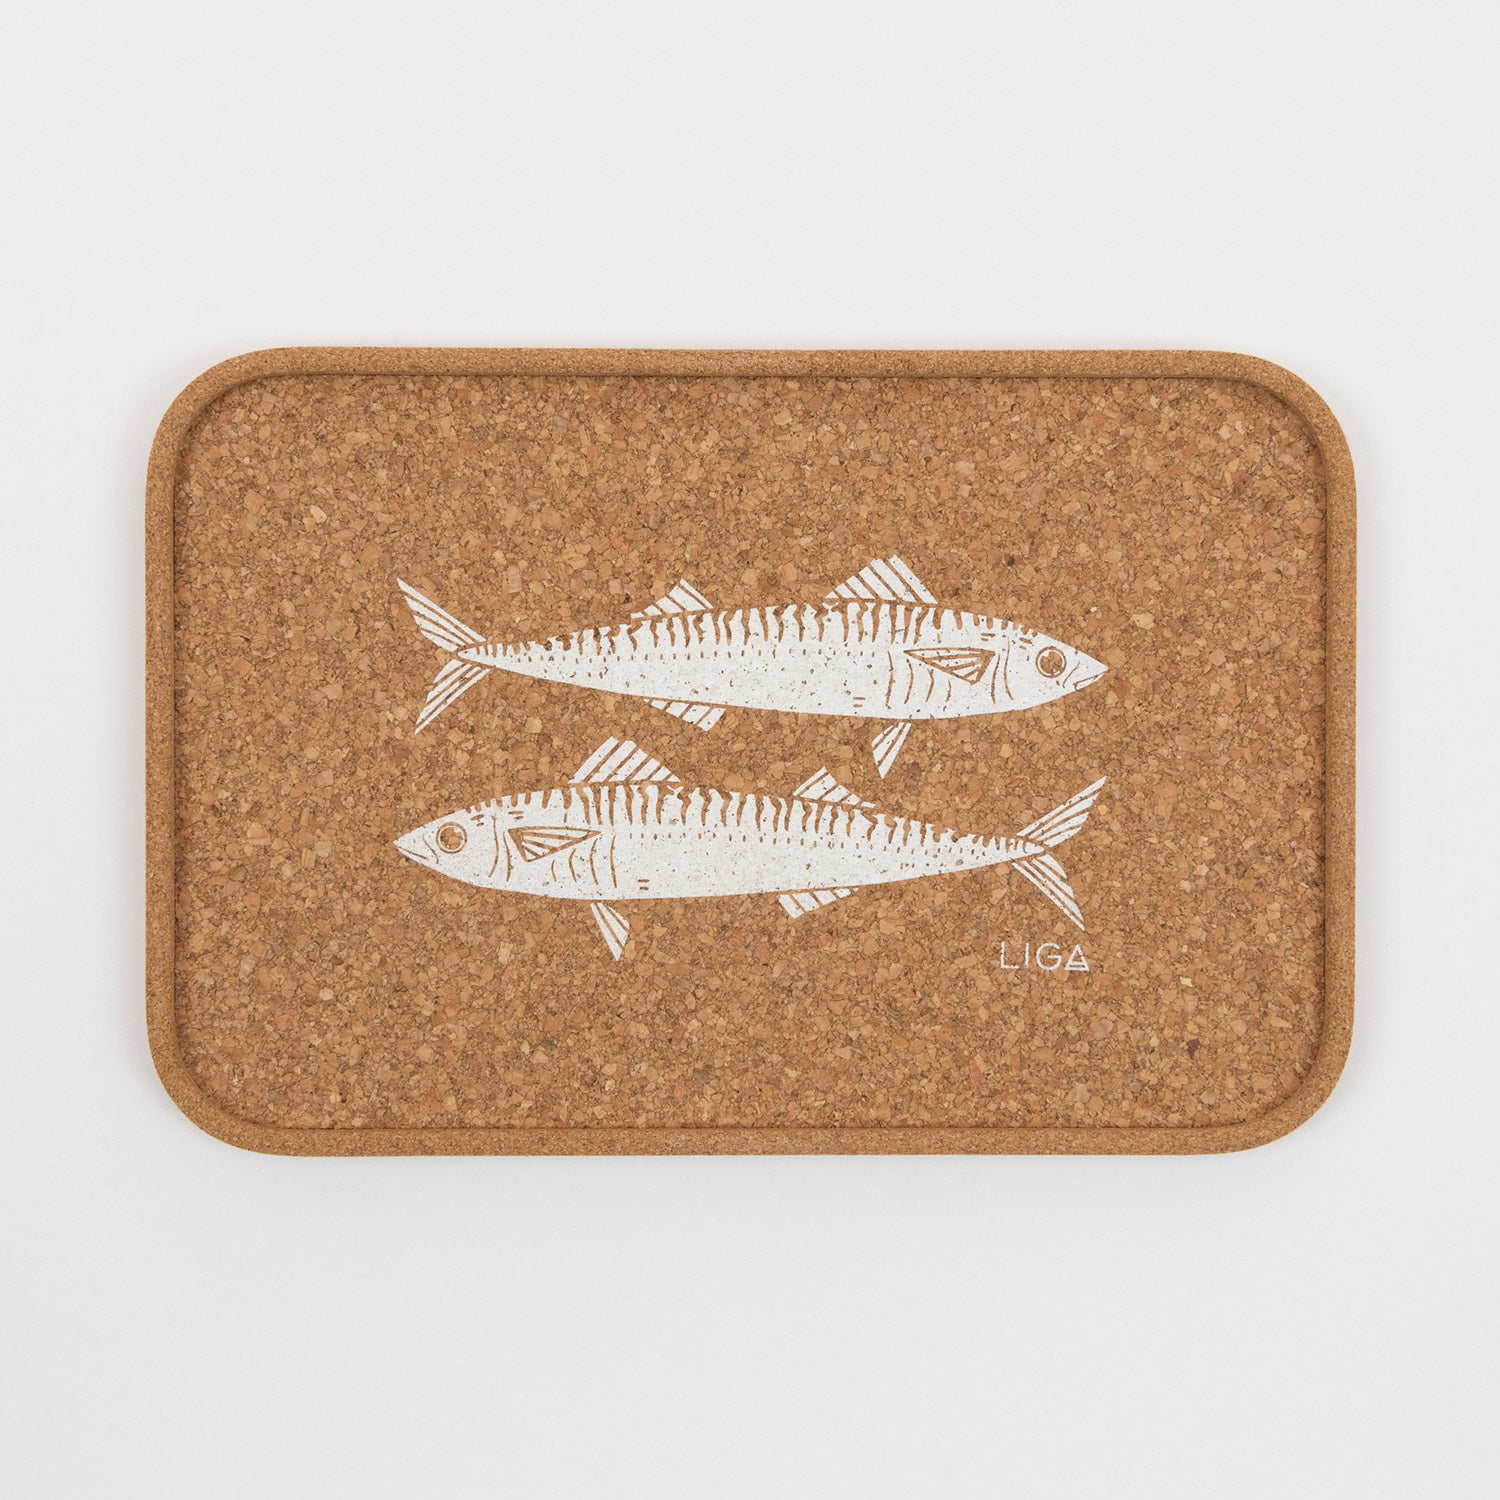 Rectangular cork drinks tray with a lip featuring an illustration of two mackerel in white.